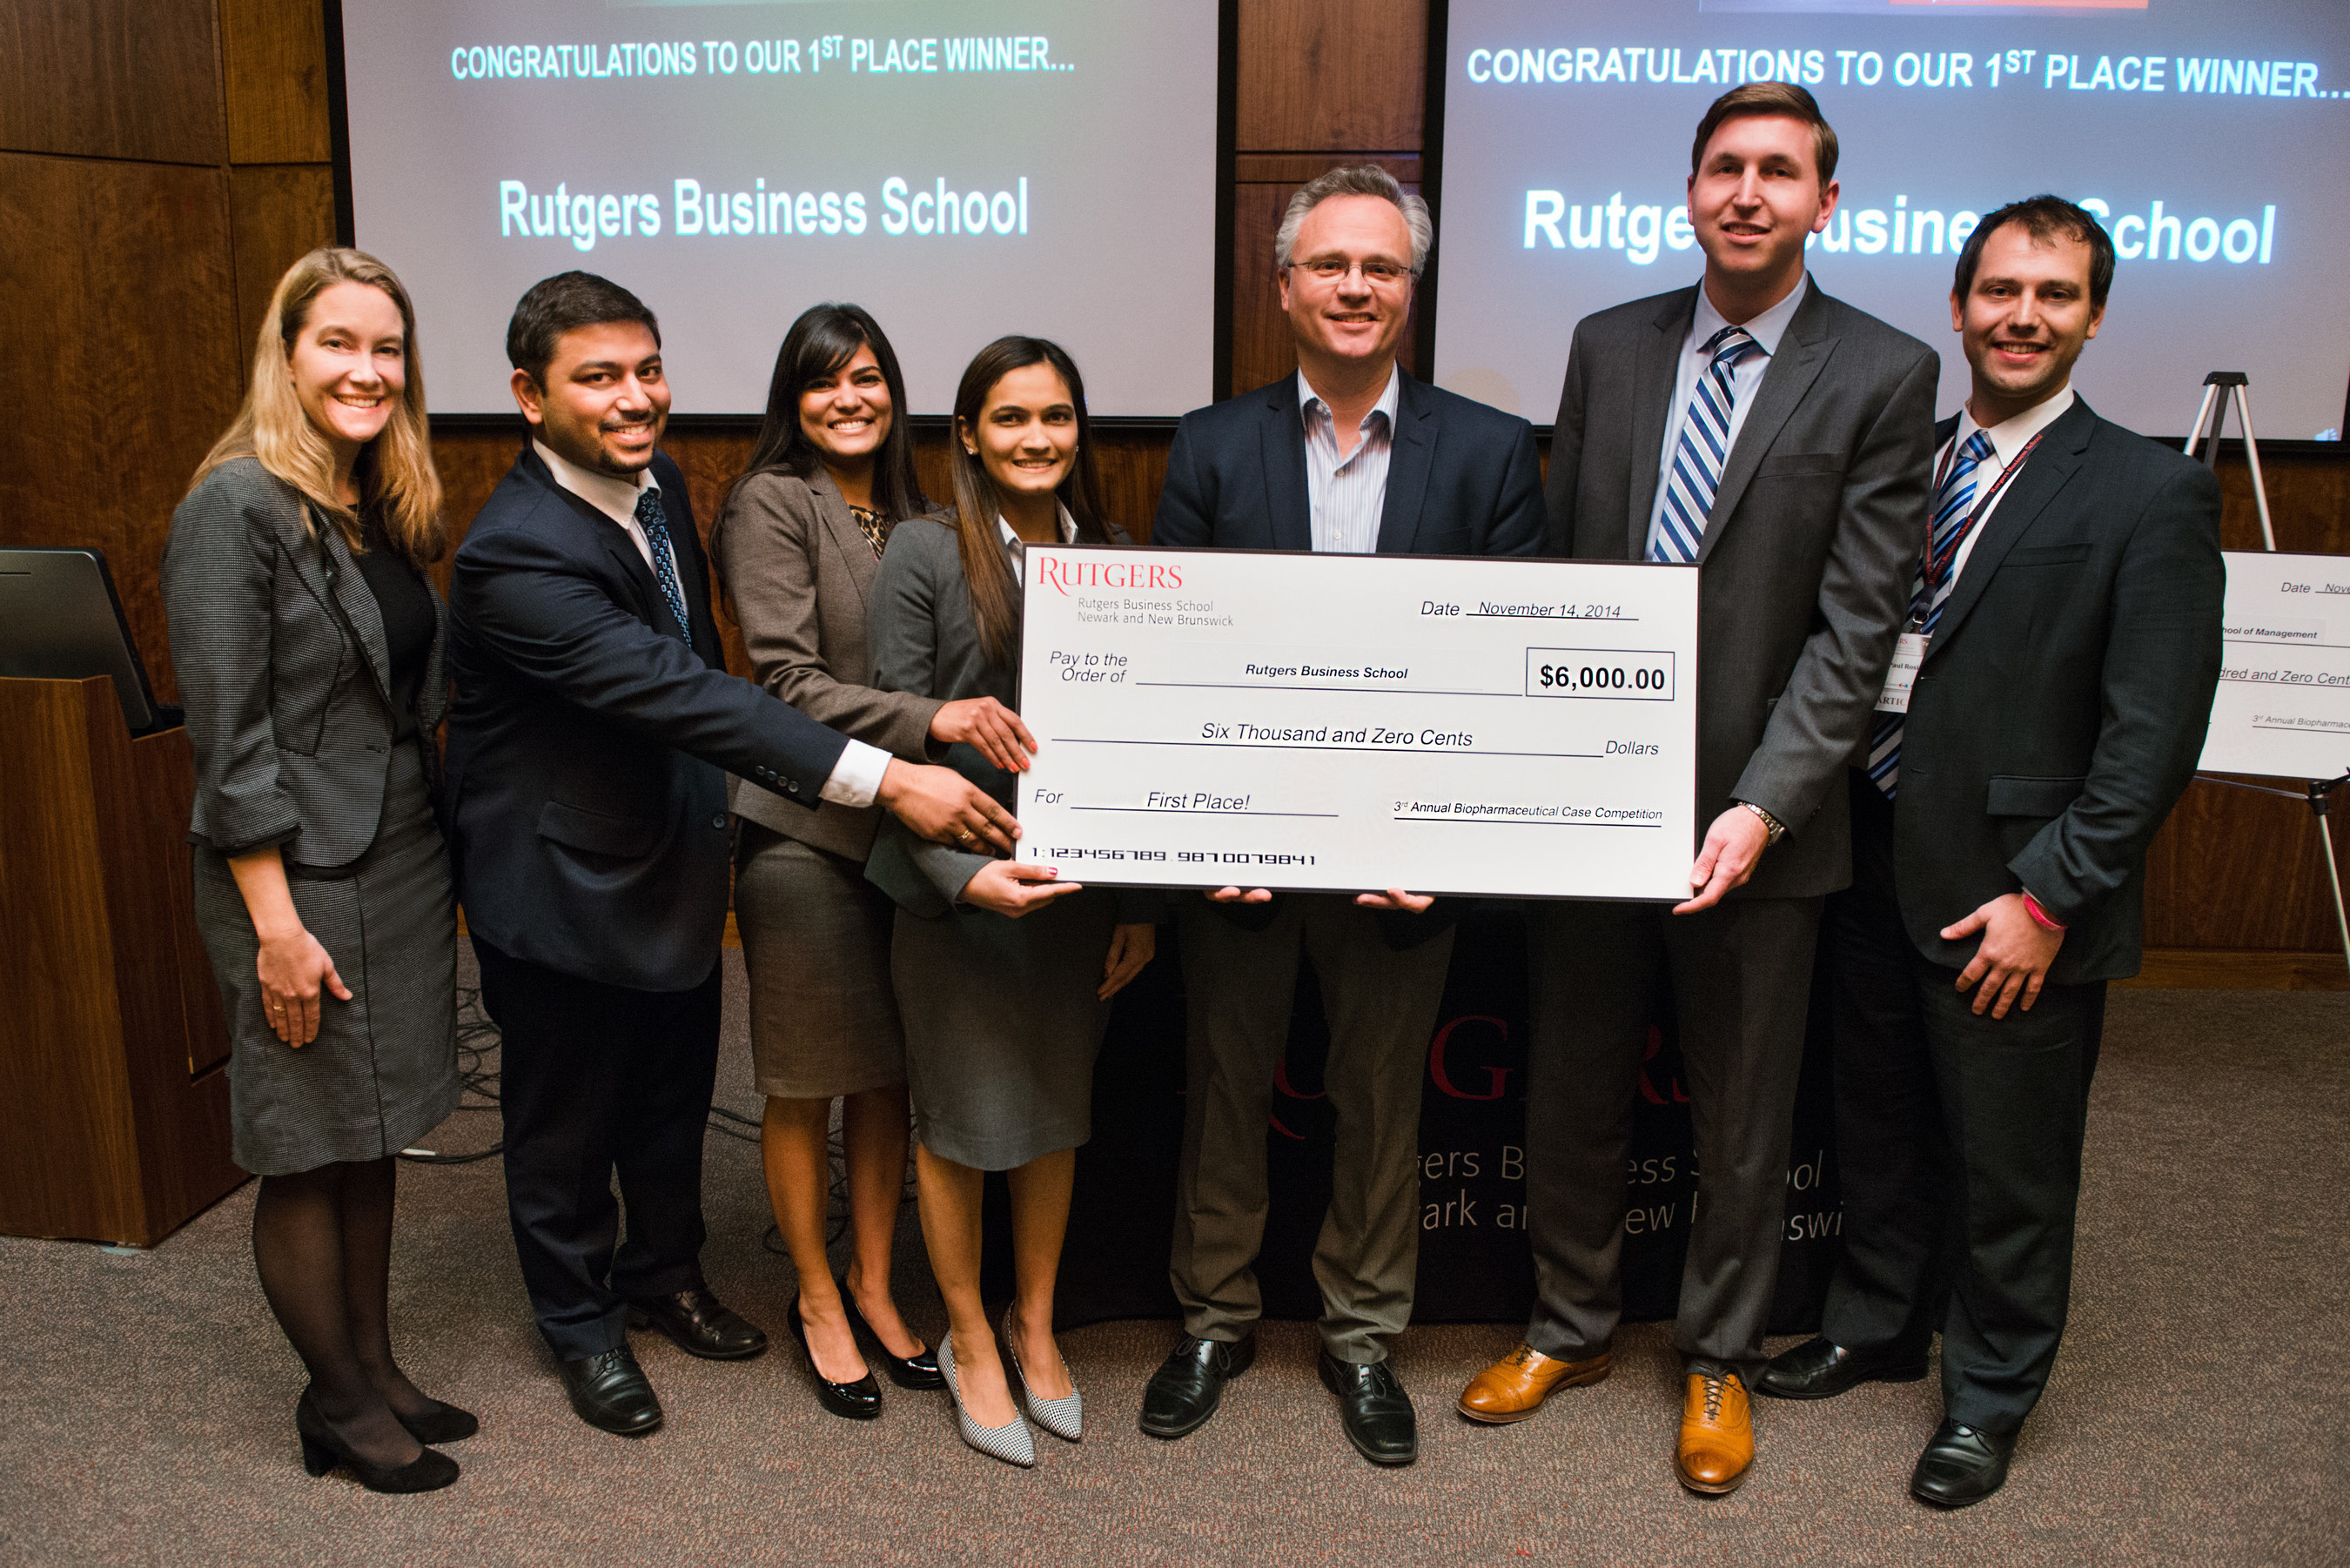 Rutgers MBA students Paul Rosiak, Michael Kwatkoski, Sonal Patel, Mittal Shah and Kinushuk Saxena are joined by Sharon Lydon, executive director of the Rutgers MBA Program, (far left) and Michael Barnett, vice dean for academic programs (center). The students won first place in the annual Rutgers biopharmaceutical case competition.